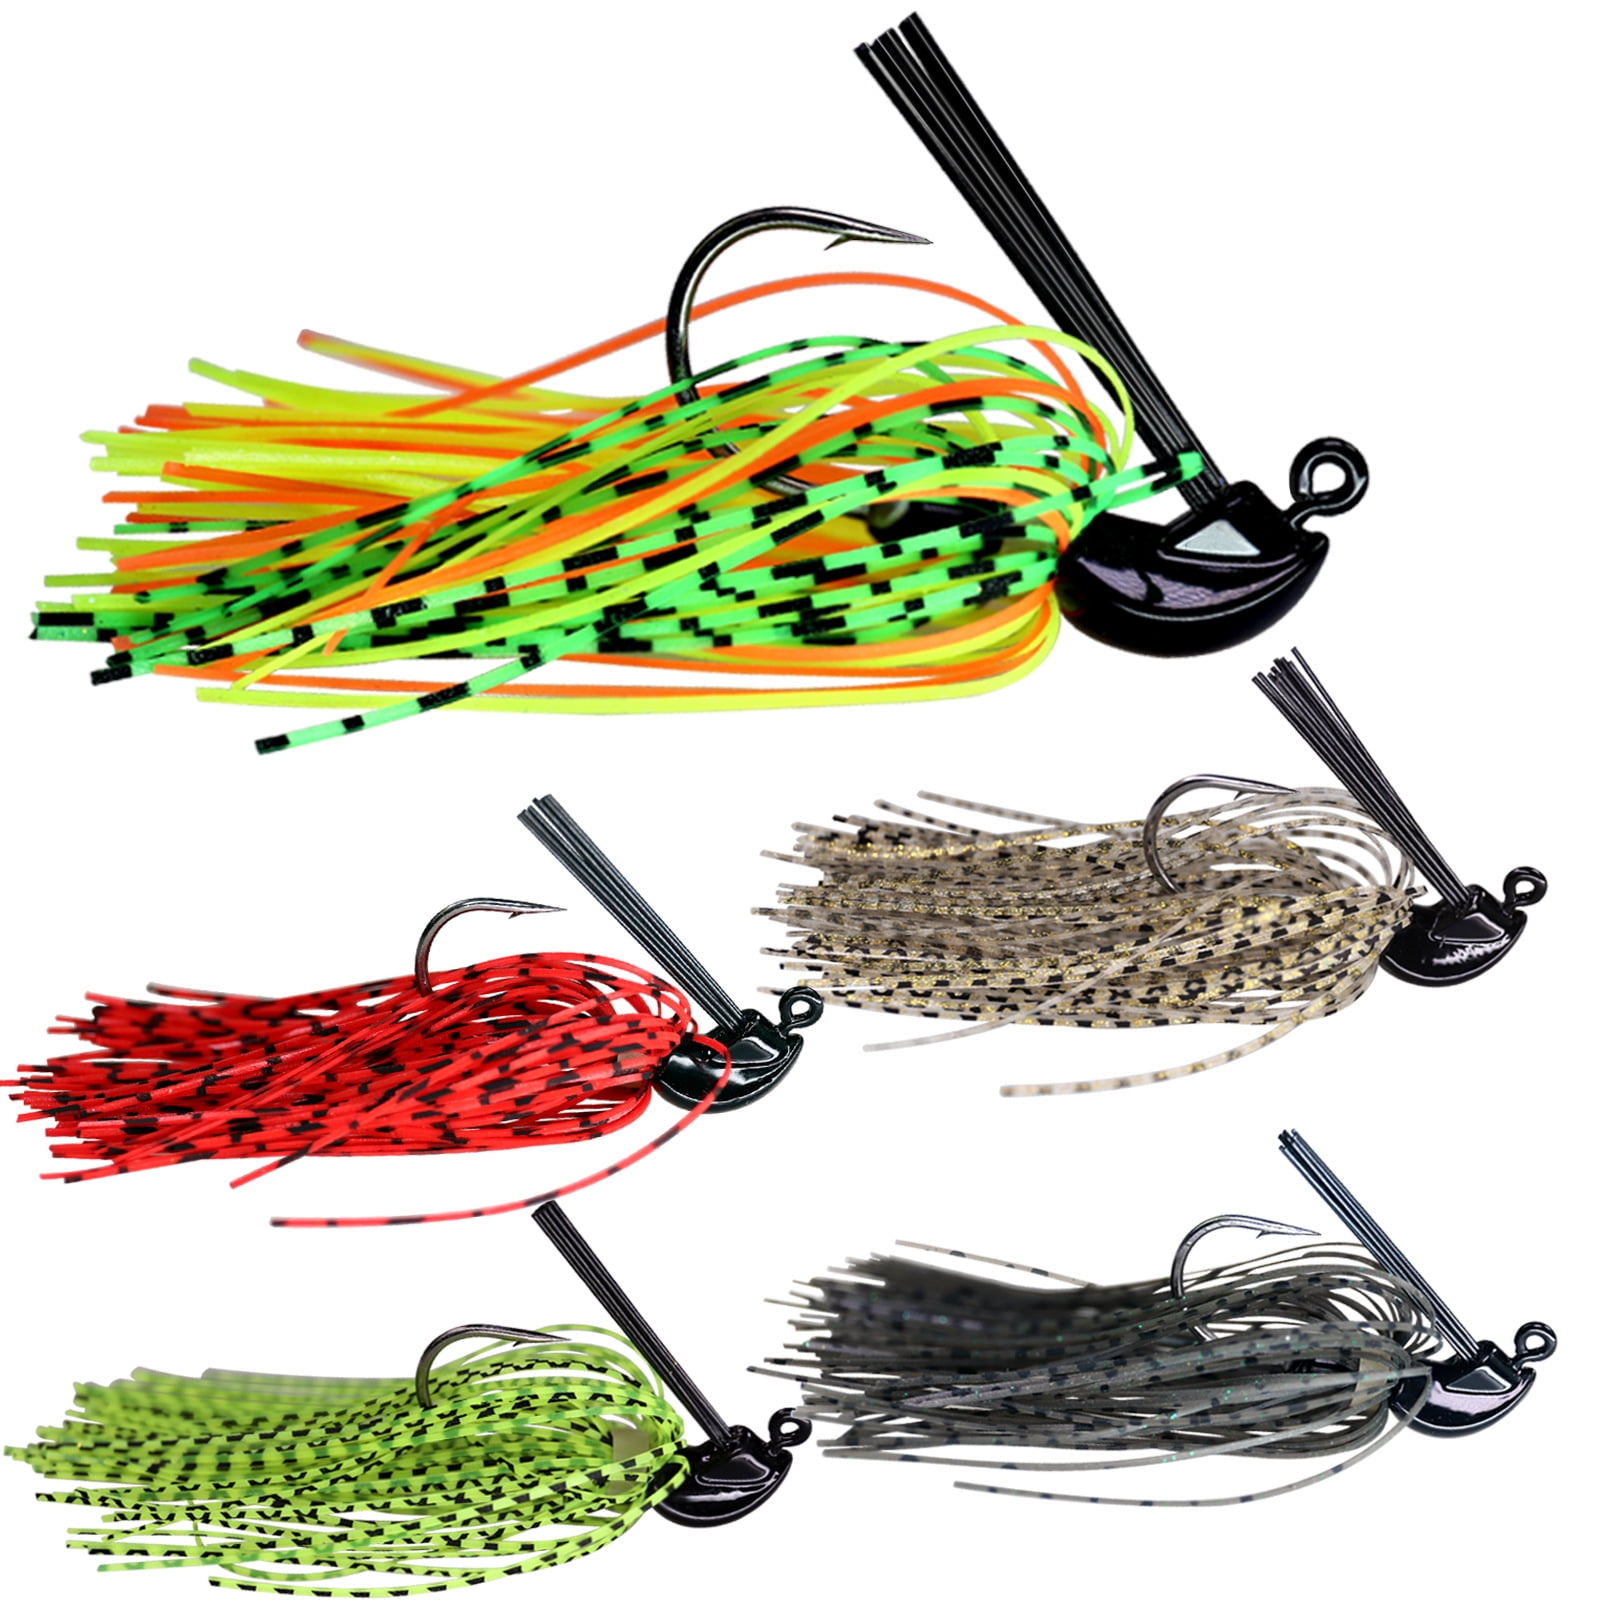 50 Strands Swim Bass Jig Fishing Lures Premium Silicone Assorted Color Fishing Skirted Lures